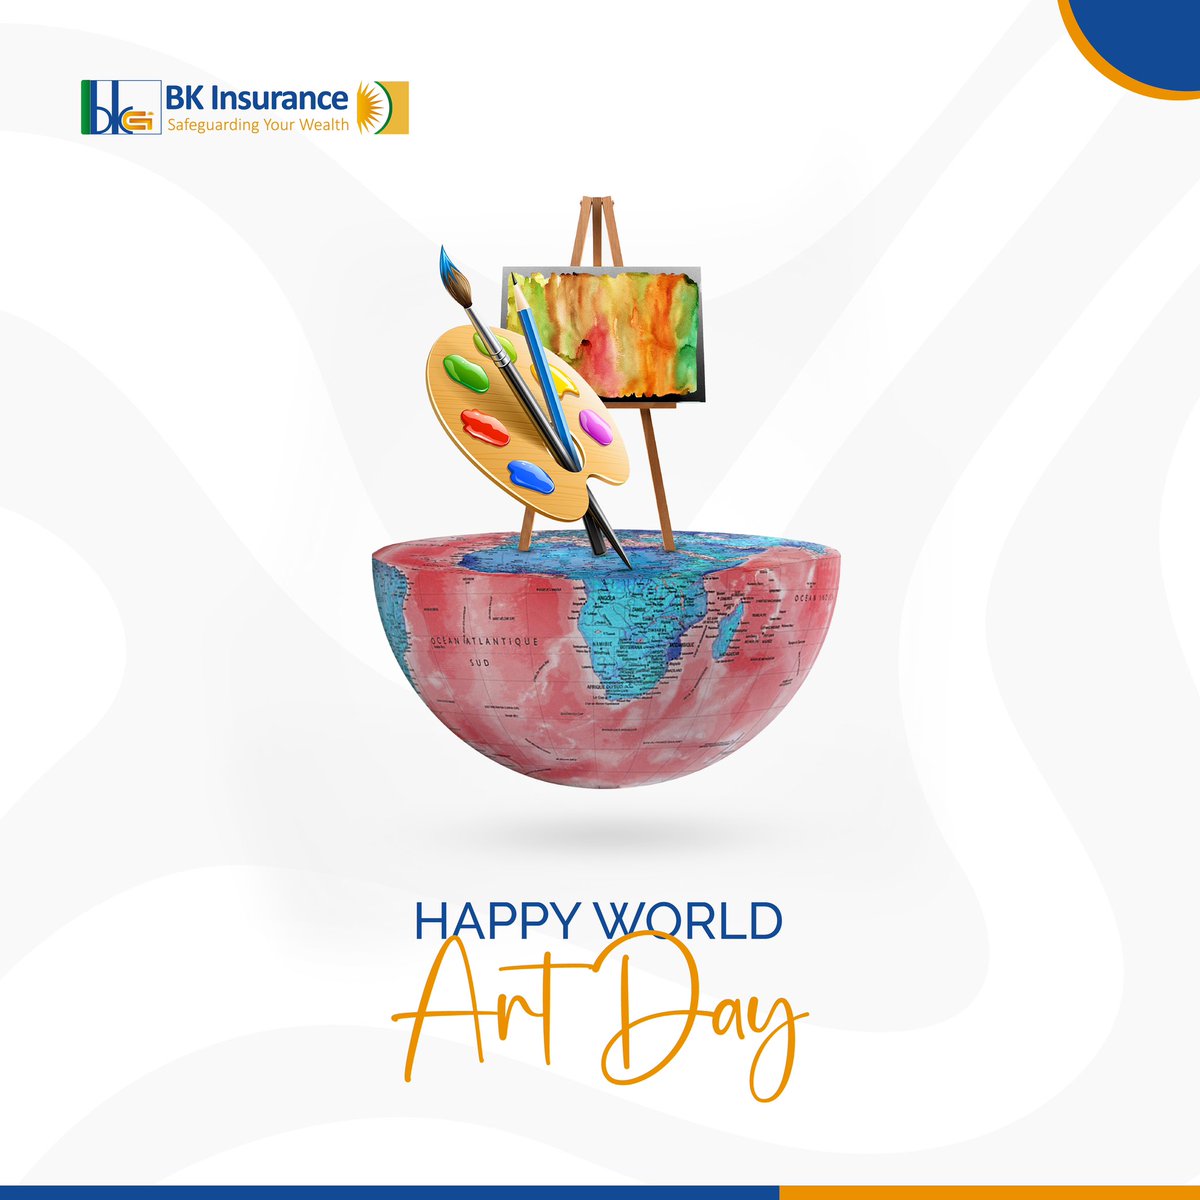 Happy new week! Today we celebrate every artist who adds color and emotion to our world. Happy world art day! How has art touched your life? Share your story or favorite artwork in the comments! #BKInsurance #RwoX #Rwot